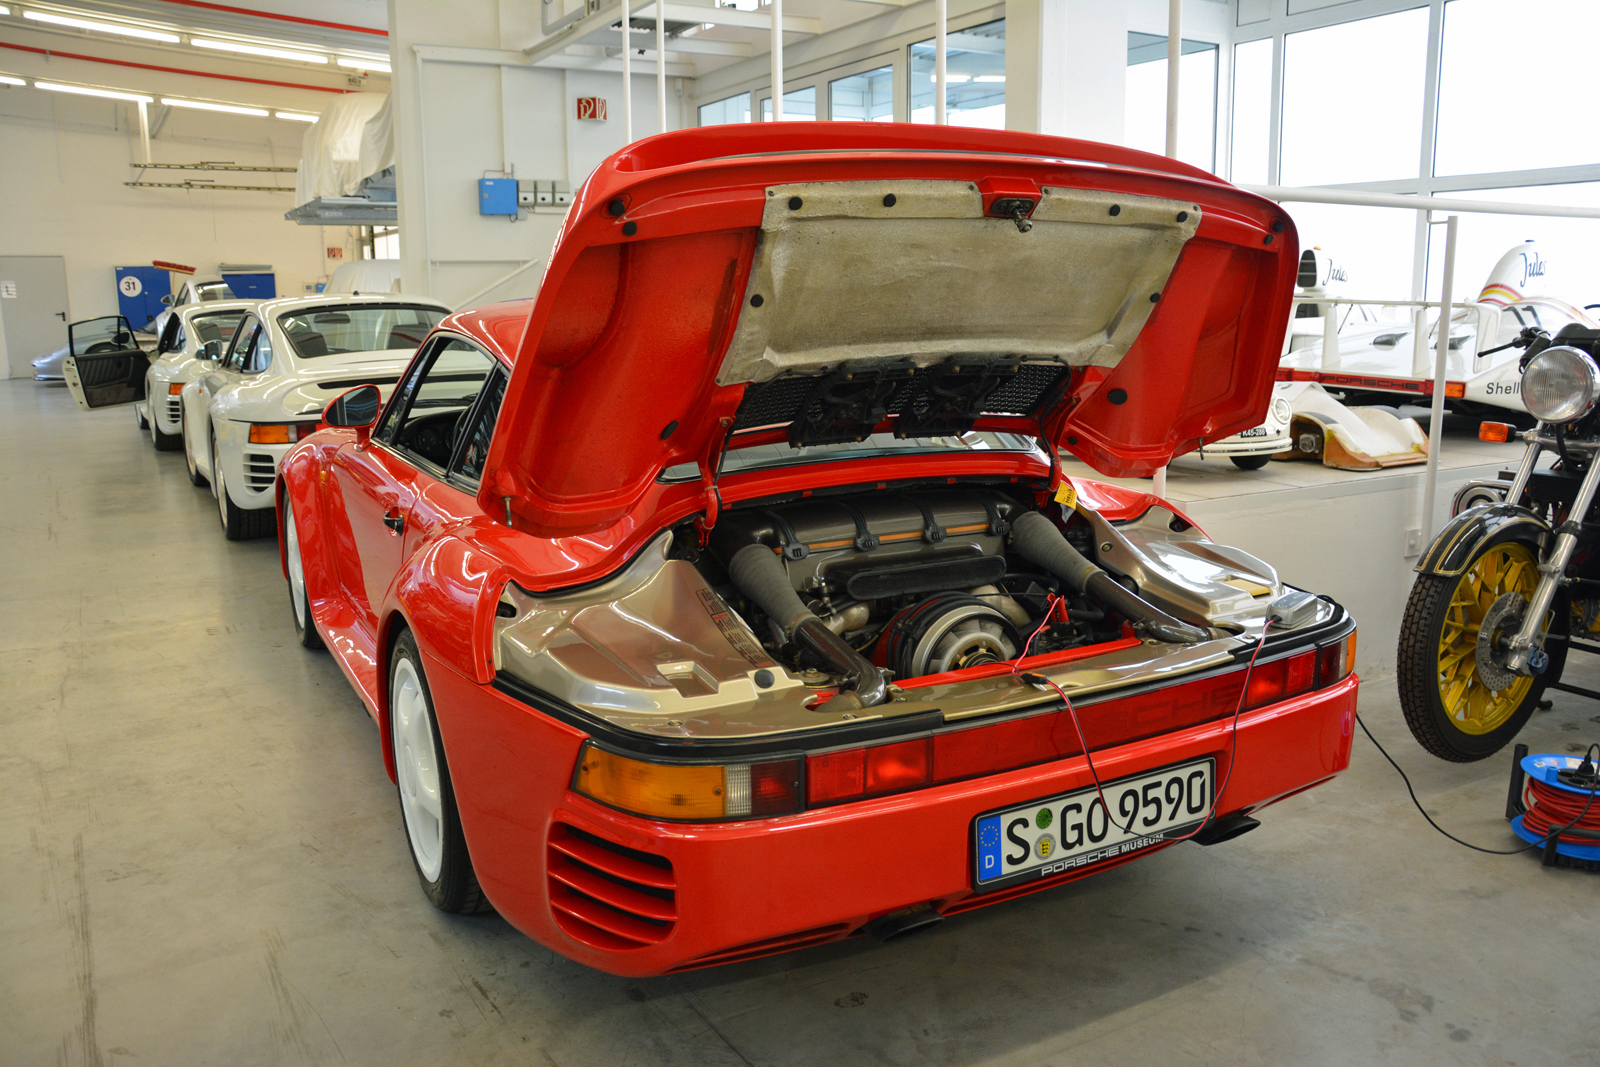 <p>Extensive use of lightweight materials such as Aramid and Nomex kept the 959’s weight in check. It was launched as a limited-edition model, and it sold out quickly in spite of an astronomical price of <strong>420,000 Deutschmarks</strong>. Porsche’s records indicate <strong>292</strong> cars were built; we saw at least four during our tour of the warehouse.</p>